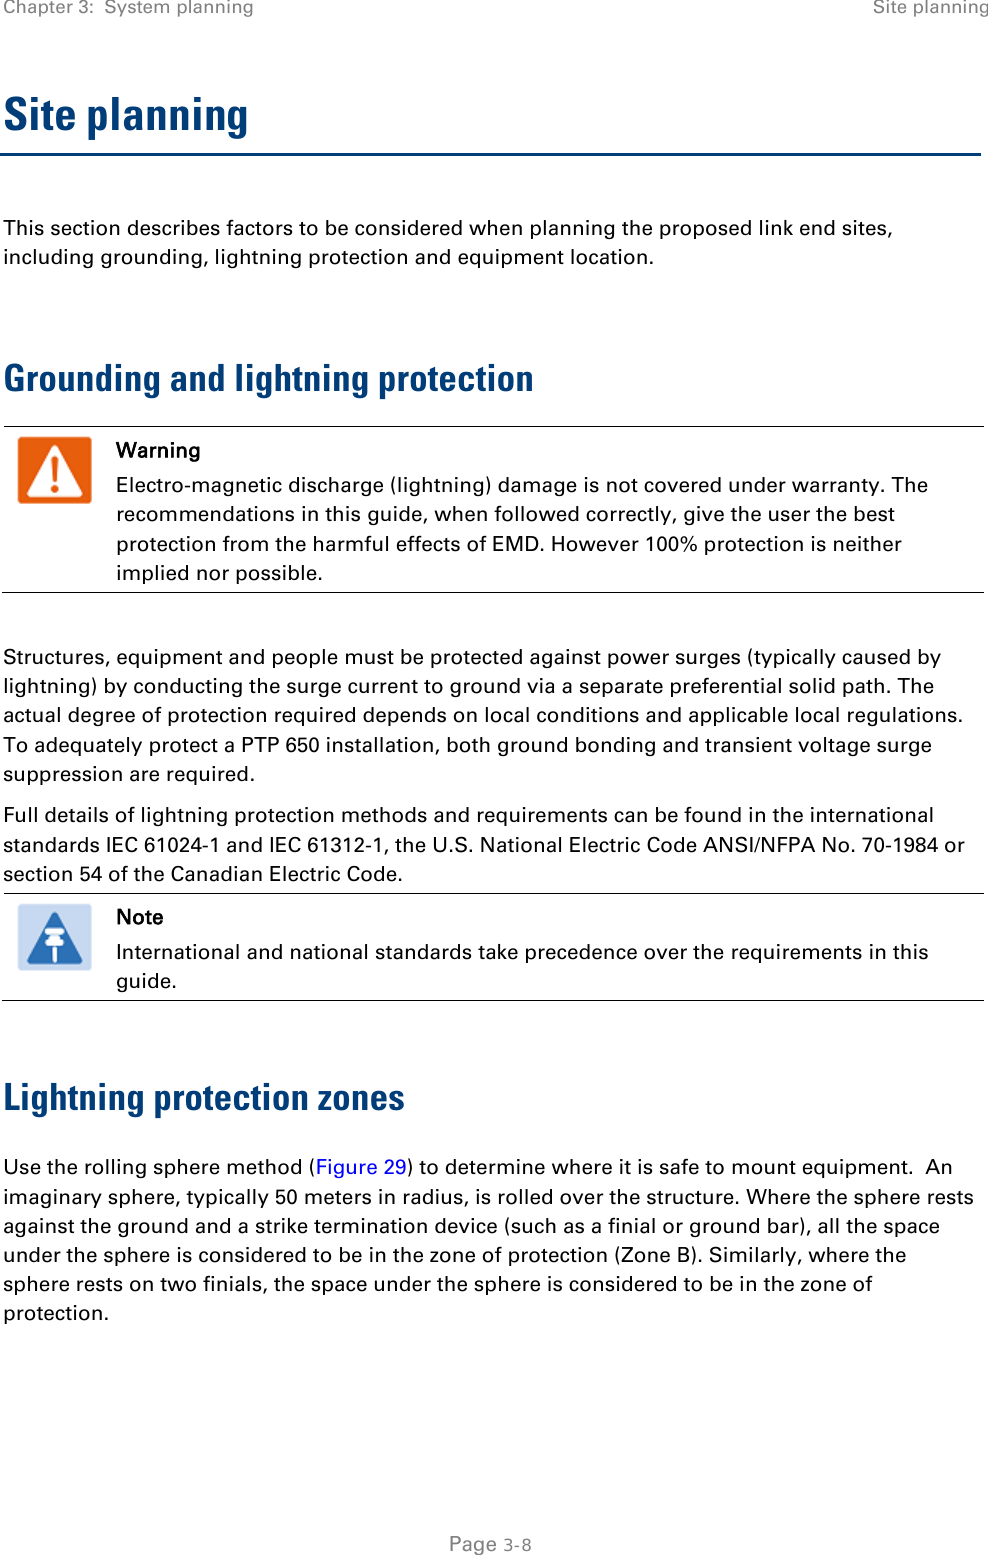 Chapter 3:  System planning Site planning  Site planning This section describes factors to be considered when planning the proposed link end sites, including grounding, lightning protection and equipment location.  Grounding and lightning protection  Warning Electro-magnetic discharge (lightning) damage is not covered under warranty. The recommendations in this guide, when followed correctly, give the user the best protection from the harmful effects of EMD. However 100% protection is neither implied nor possible.  Structures, equipment and people must be protected against power surges (typically caused by lightning) by conducting the surge current to ground via a separate preferential solid path. The actual degree of protection required depends on local conditions and applicable local regulations. To adequately protect a PTP 650 installation, both ground bonding and transient voltage surge suppression are required. Full details of lightning protection methods and requirements can be found in the international standards IEC 61024-1 and IEC 61312-1, the U.S. National Electric Code ANSI/NFPA No. 70-1984 or section 54 of the Canadian Electric Code.   Note International and national standards take precedence over the requirements in this guide.  Lightning protection zones Use the rolling sphere method (Figure 29) to determine where it is safe to mount equipment.  An imaginary sphere, typically 50 meters in radius, is rolled over the structure. Where the sphere rests against the ground and a strike termination device (such as a finial or ground bar), all the space under the sphere is considered to be in the zone of protection (Zone B). Similarly, where the sphere rests on two finials, the space under the sphere is considered to be in the zone of protection.  Page 3-8 